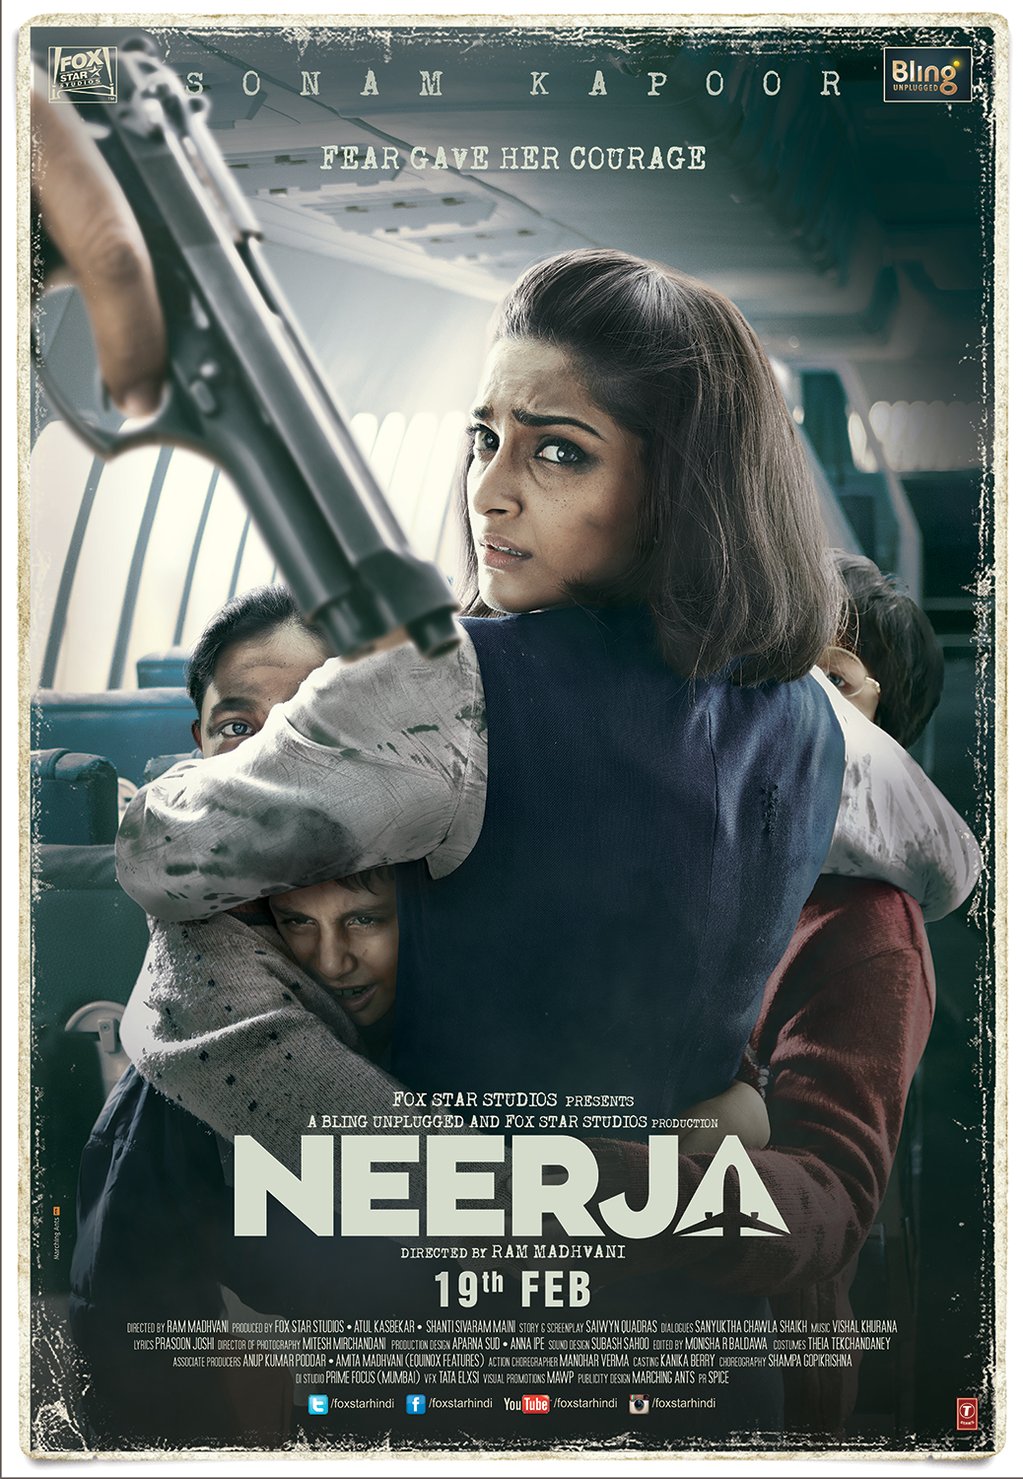 Who acted as the lead character of the movie, Neerja?